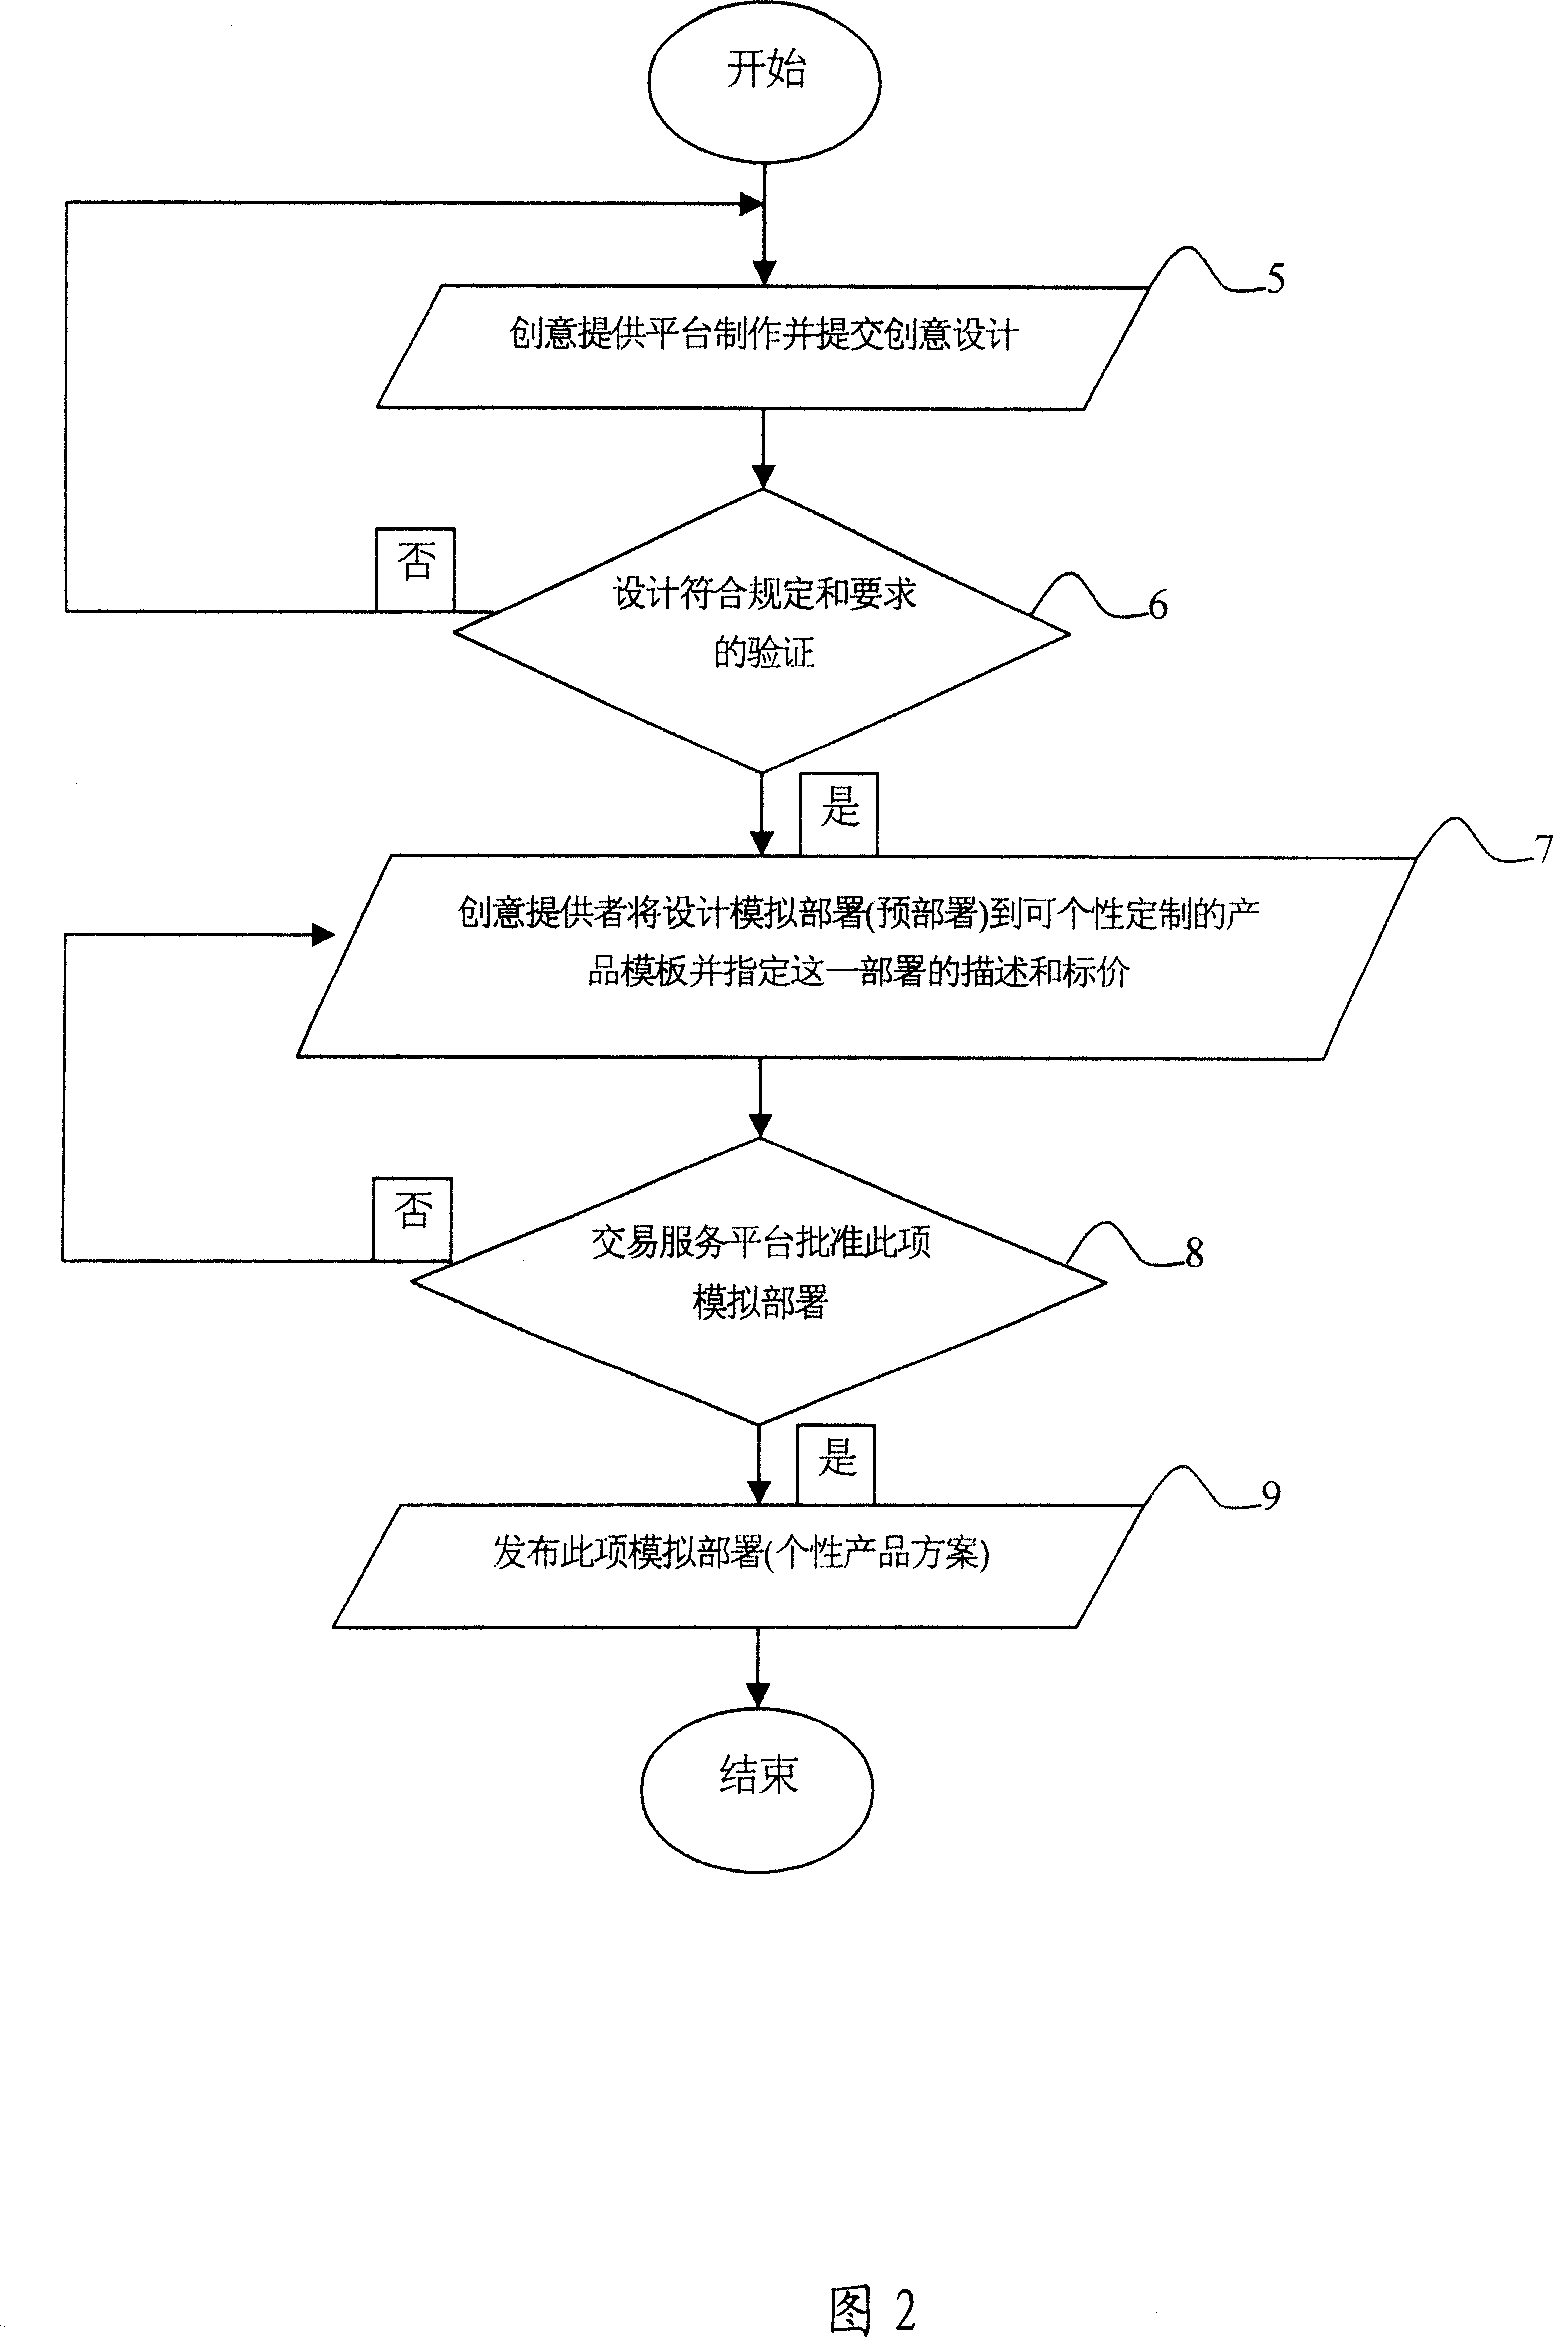 Method and system for trading and tailoring personalized products